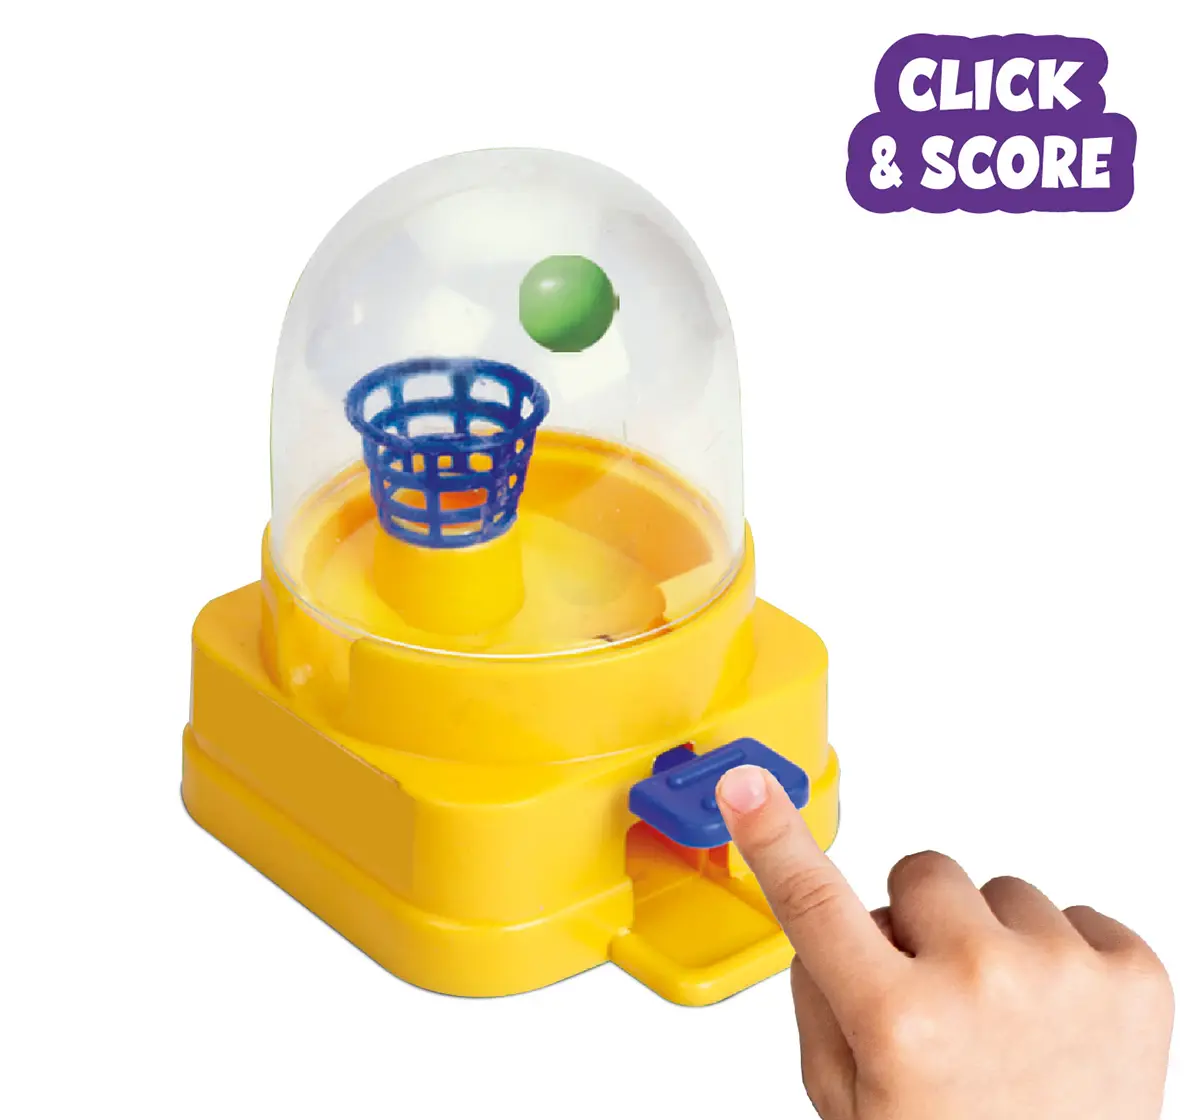 PlayMagic Pocket Basketball Set For Kids of Age 5Y+, Multicolour